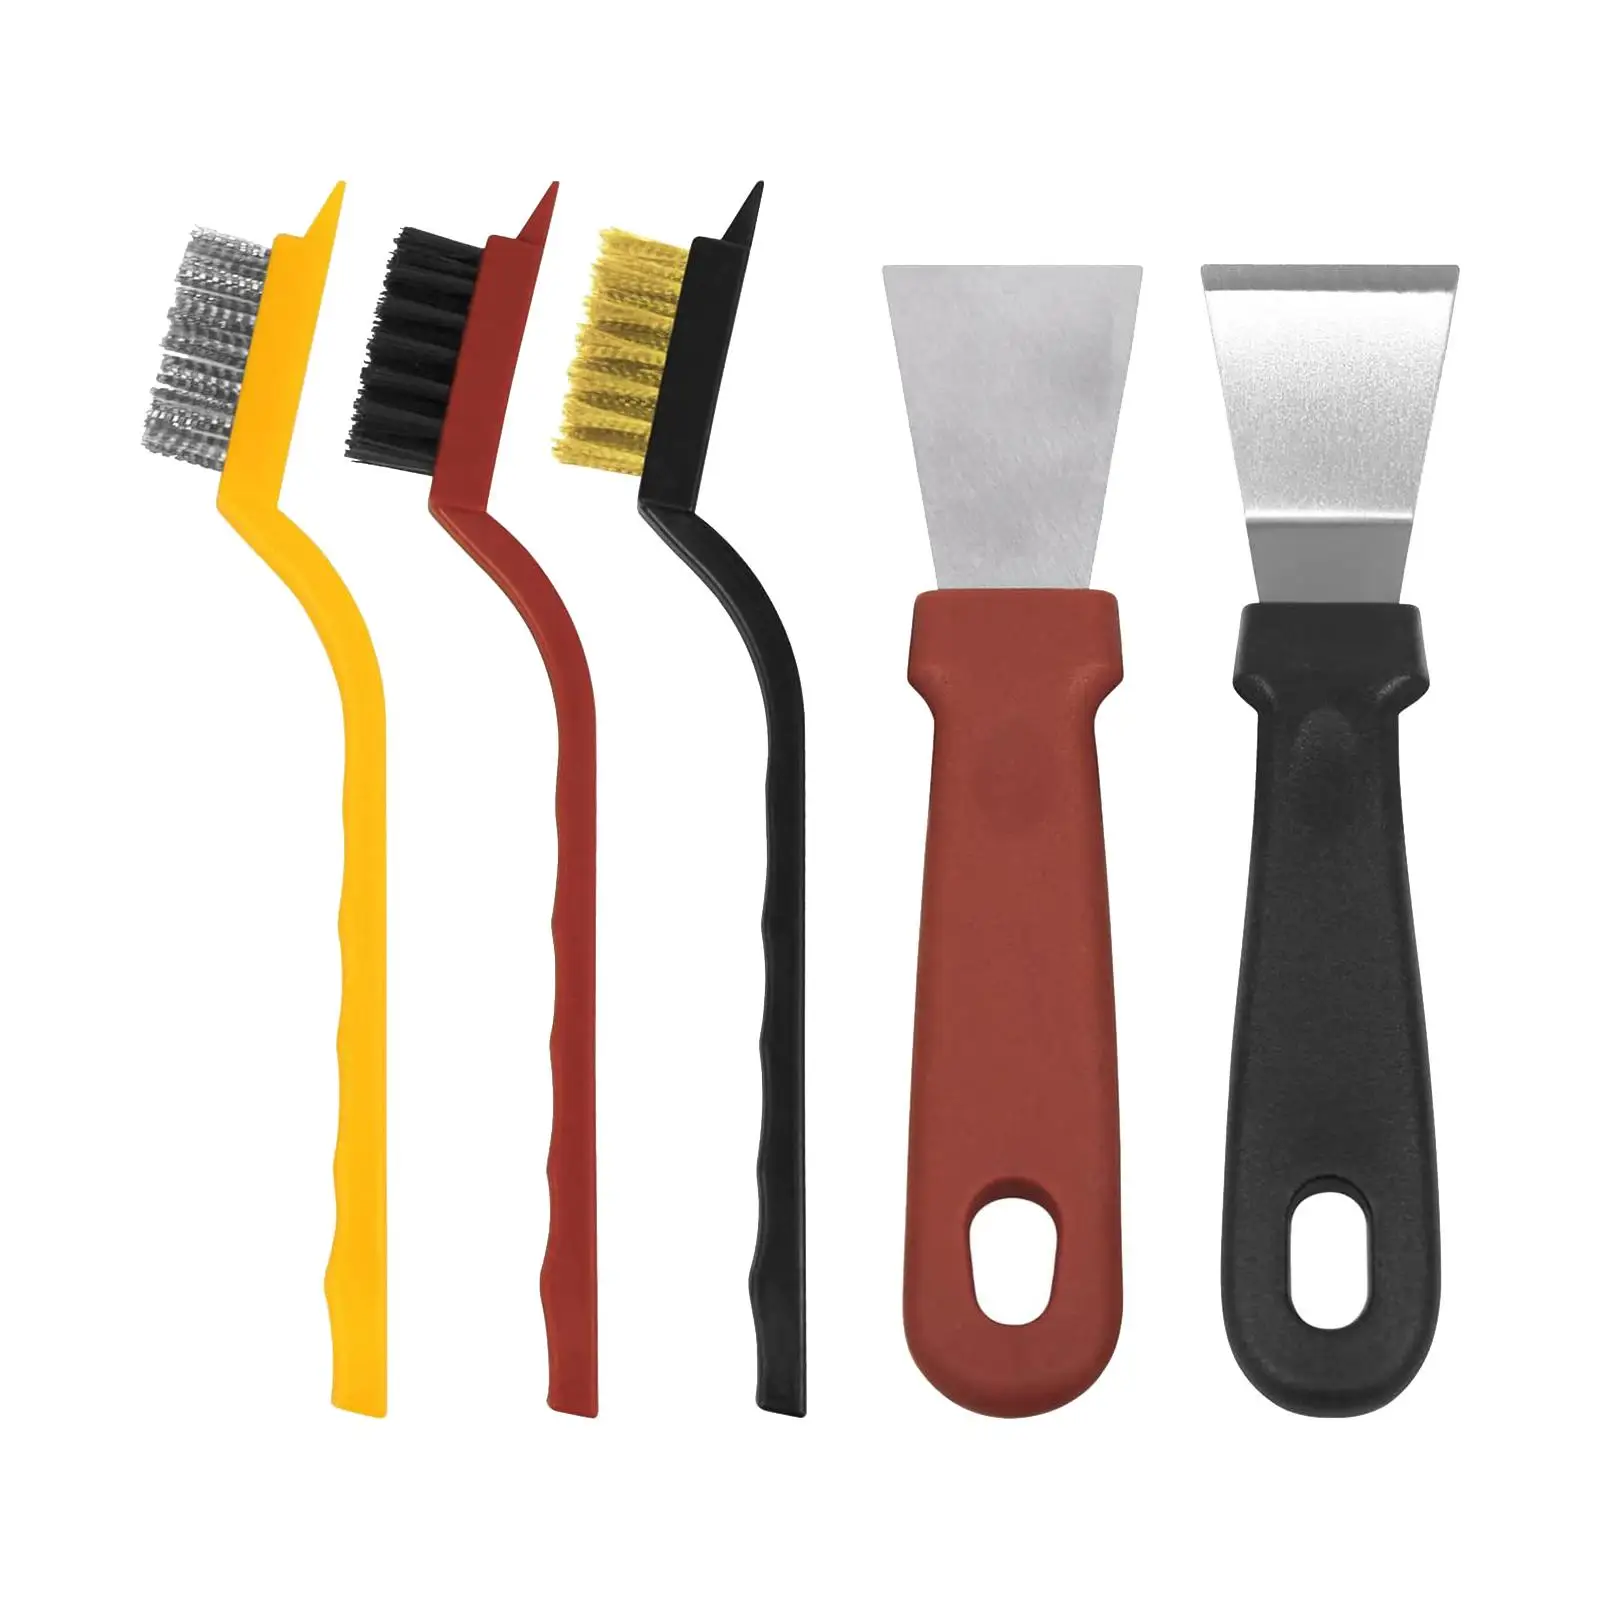 5Pcs Wire Brush Set Scraper Tool Deep Cleaning for Dirt and Paint Scrubbing with Curved Handle Grip Stove Cleaning Brush